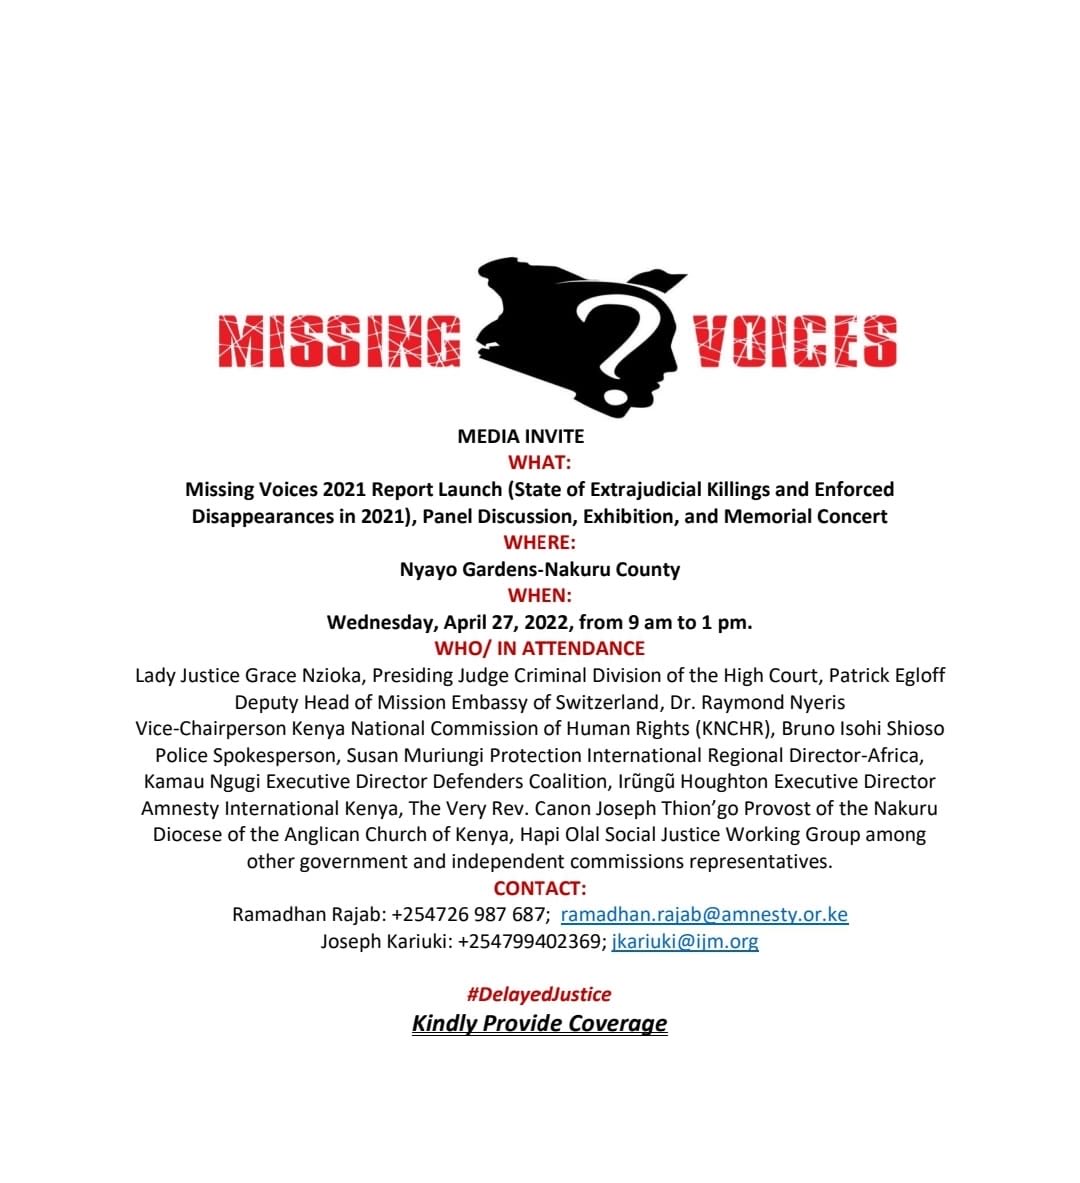 Lets meet tomorrow and tell it as it is. Missing Voices 2021 Report Launch at Nyayo Gardens, Nakuru. State of Extrajudicial Killings and Enforced Disappearances in Kenya. Thanks team #DelayedJustice ⁦@DefendersKE⁩ ⁦@AmnestyKenya⁩ ⁦@IMLU_org⁩ ⁦@HakiAfrica⁩